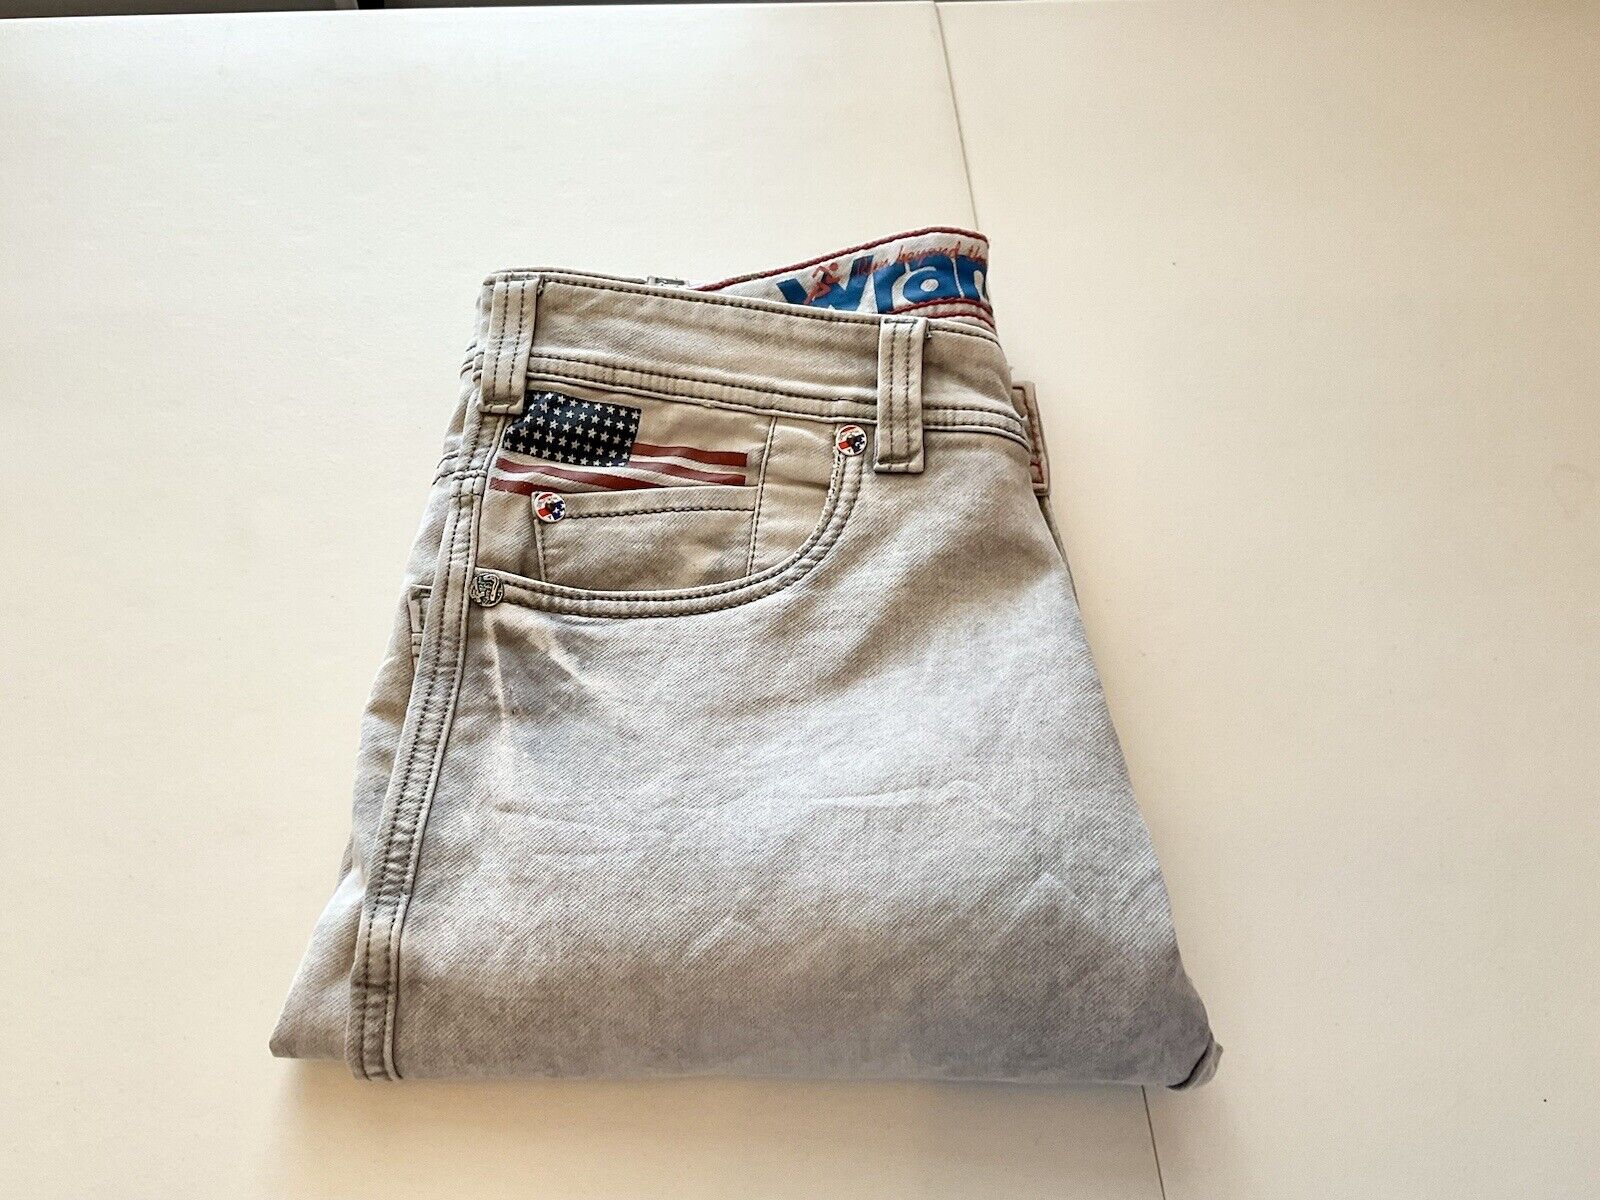 Wrangler RARE Special 1947 American Flag Jeans Silver Distressed Size 32 X 27